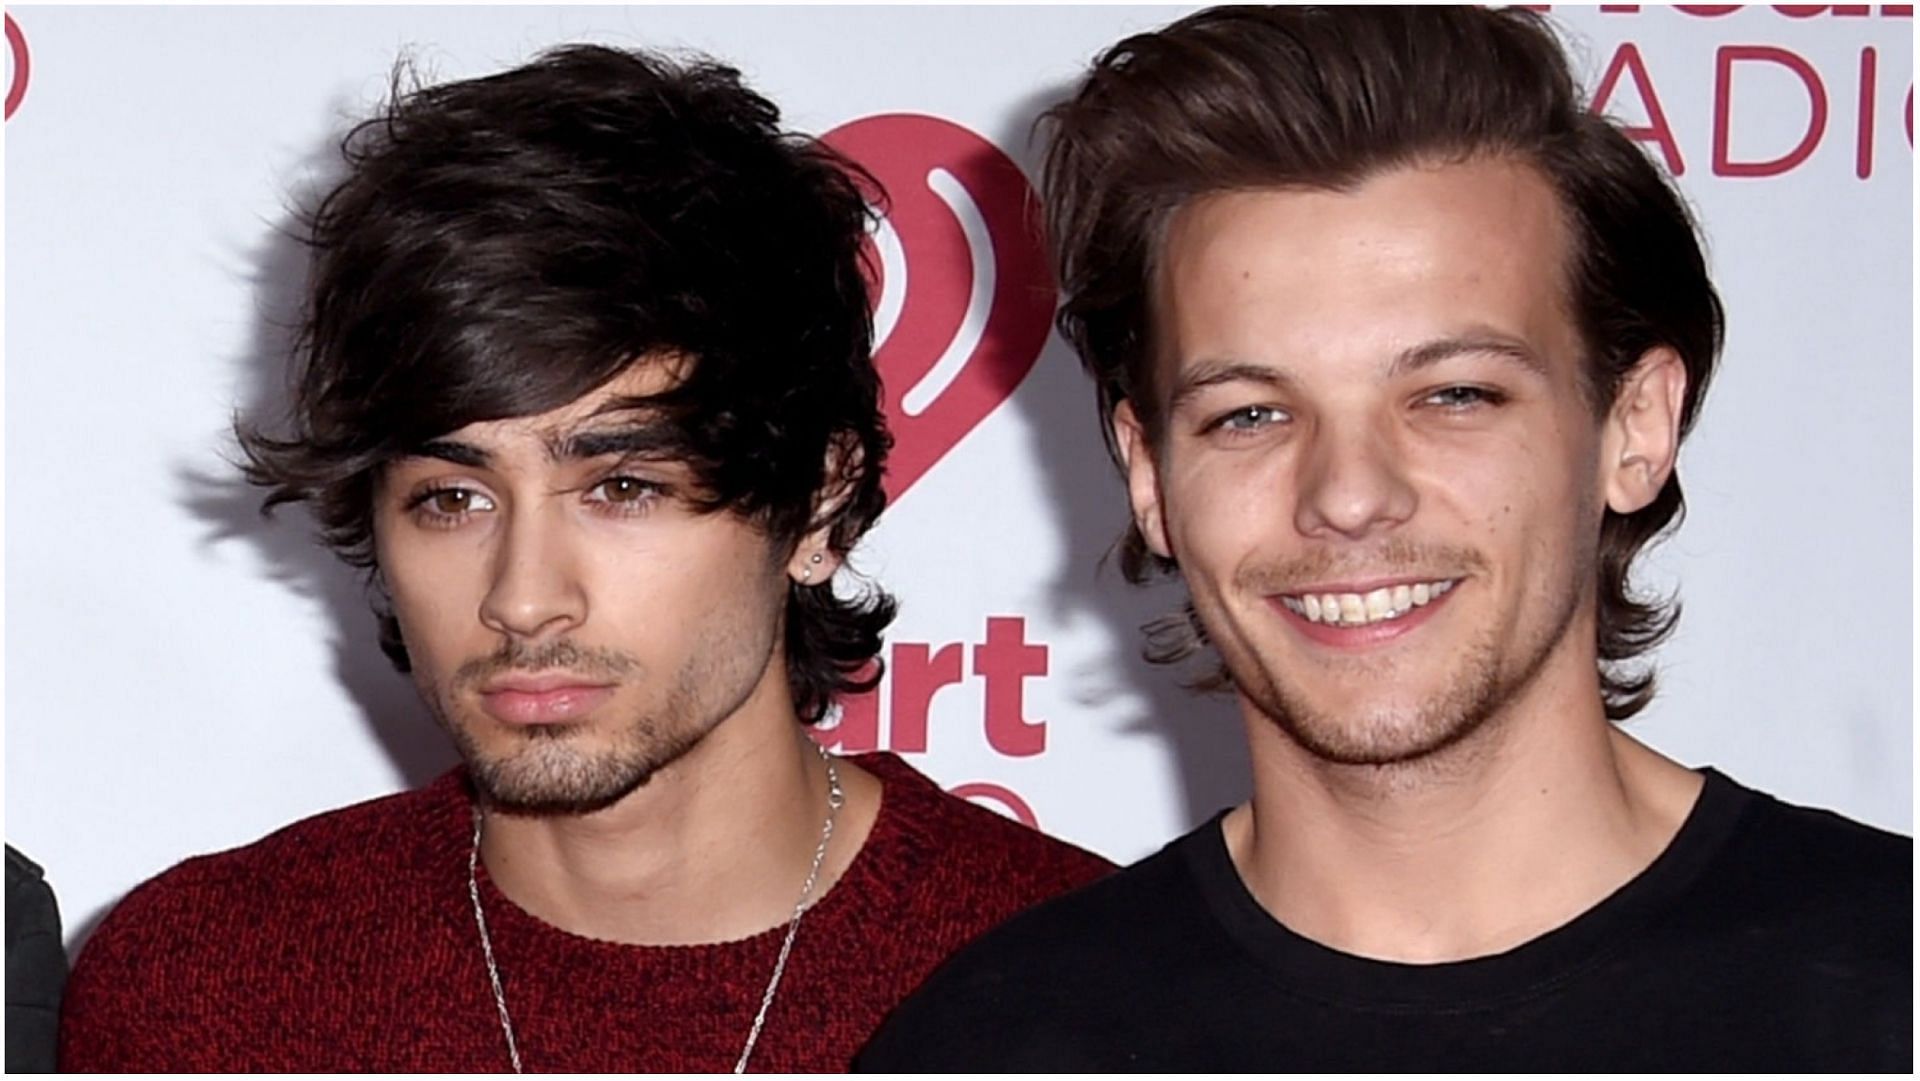 Louis Tomlinson spoke on his strained relationship with Zayn Malik (Image via Steve Granitz/Getty Images)